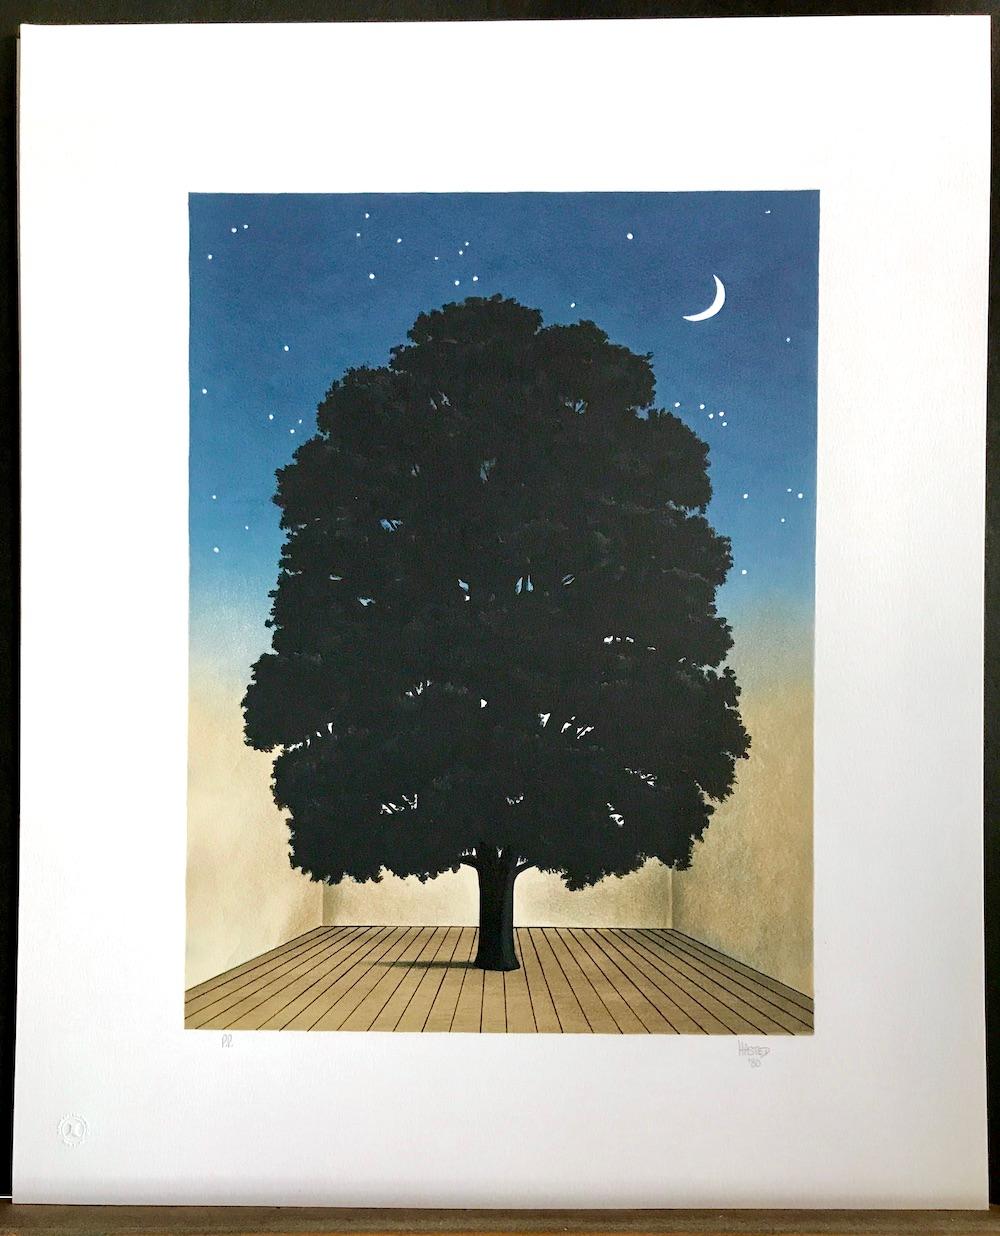 SONG OF PRAISE is an original hand drawn limited edition lithograph by the British artist, Michael Hasted printed using hand lithography on archival Somerset paper, 100% acid free.
SONG OF PRAISE is a surrealist composition portraying a curious